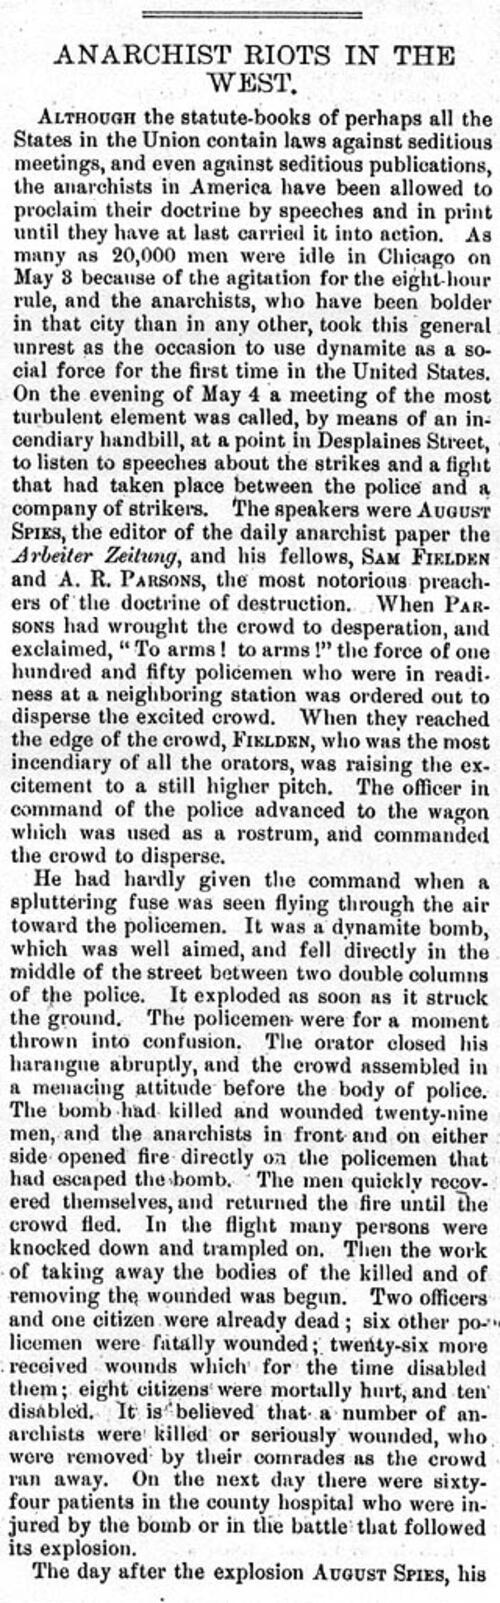 "Anarchist Riots in the West" Article About the Bombing in Chicago's Haymarket Square, Page 1